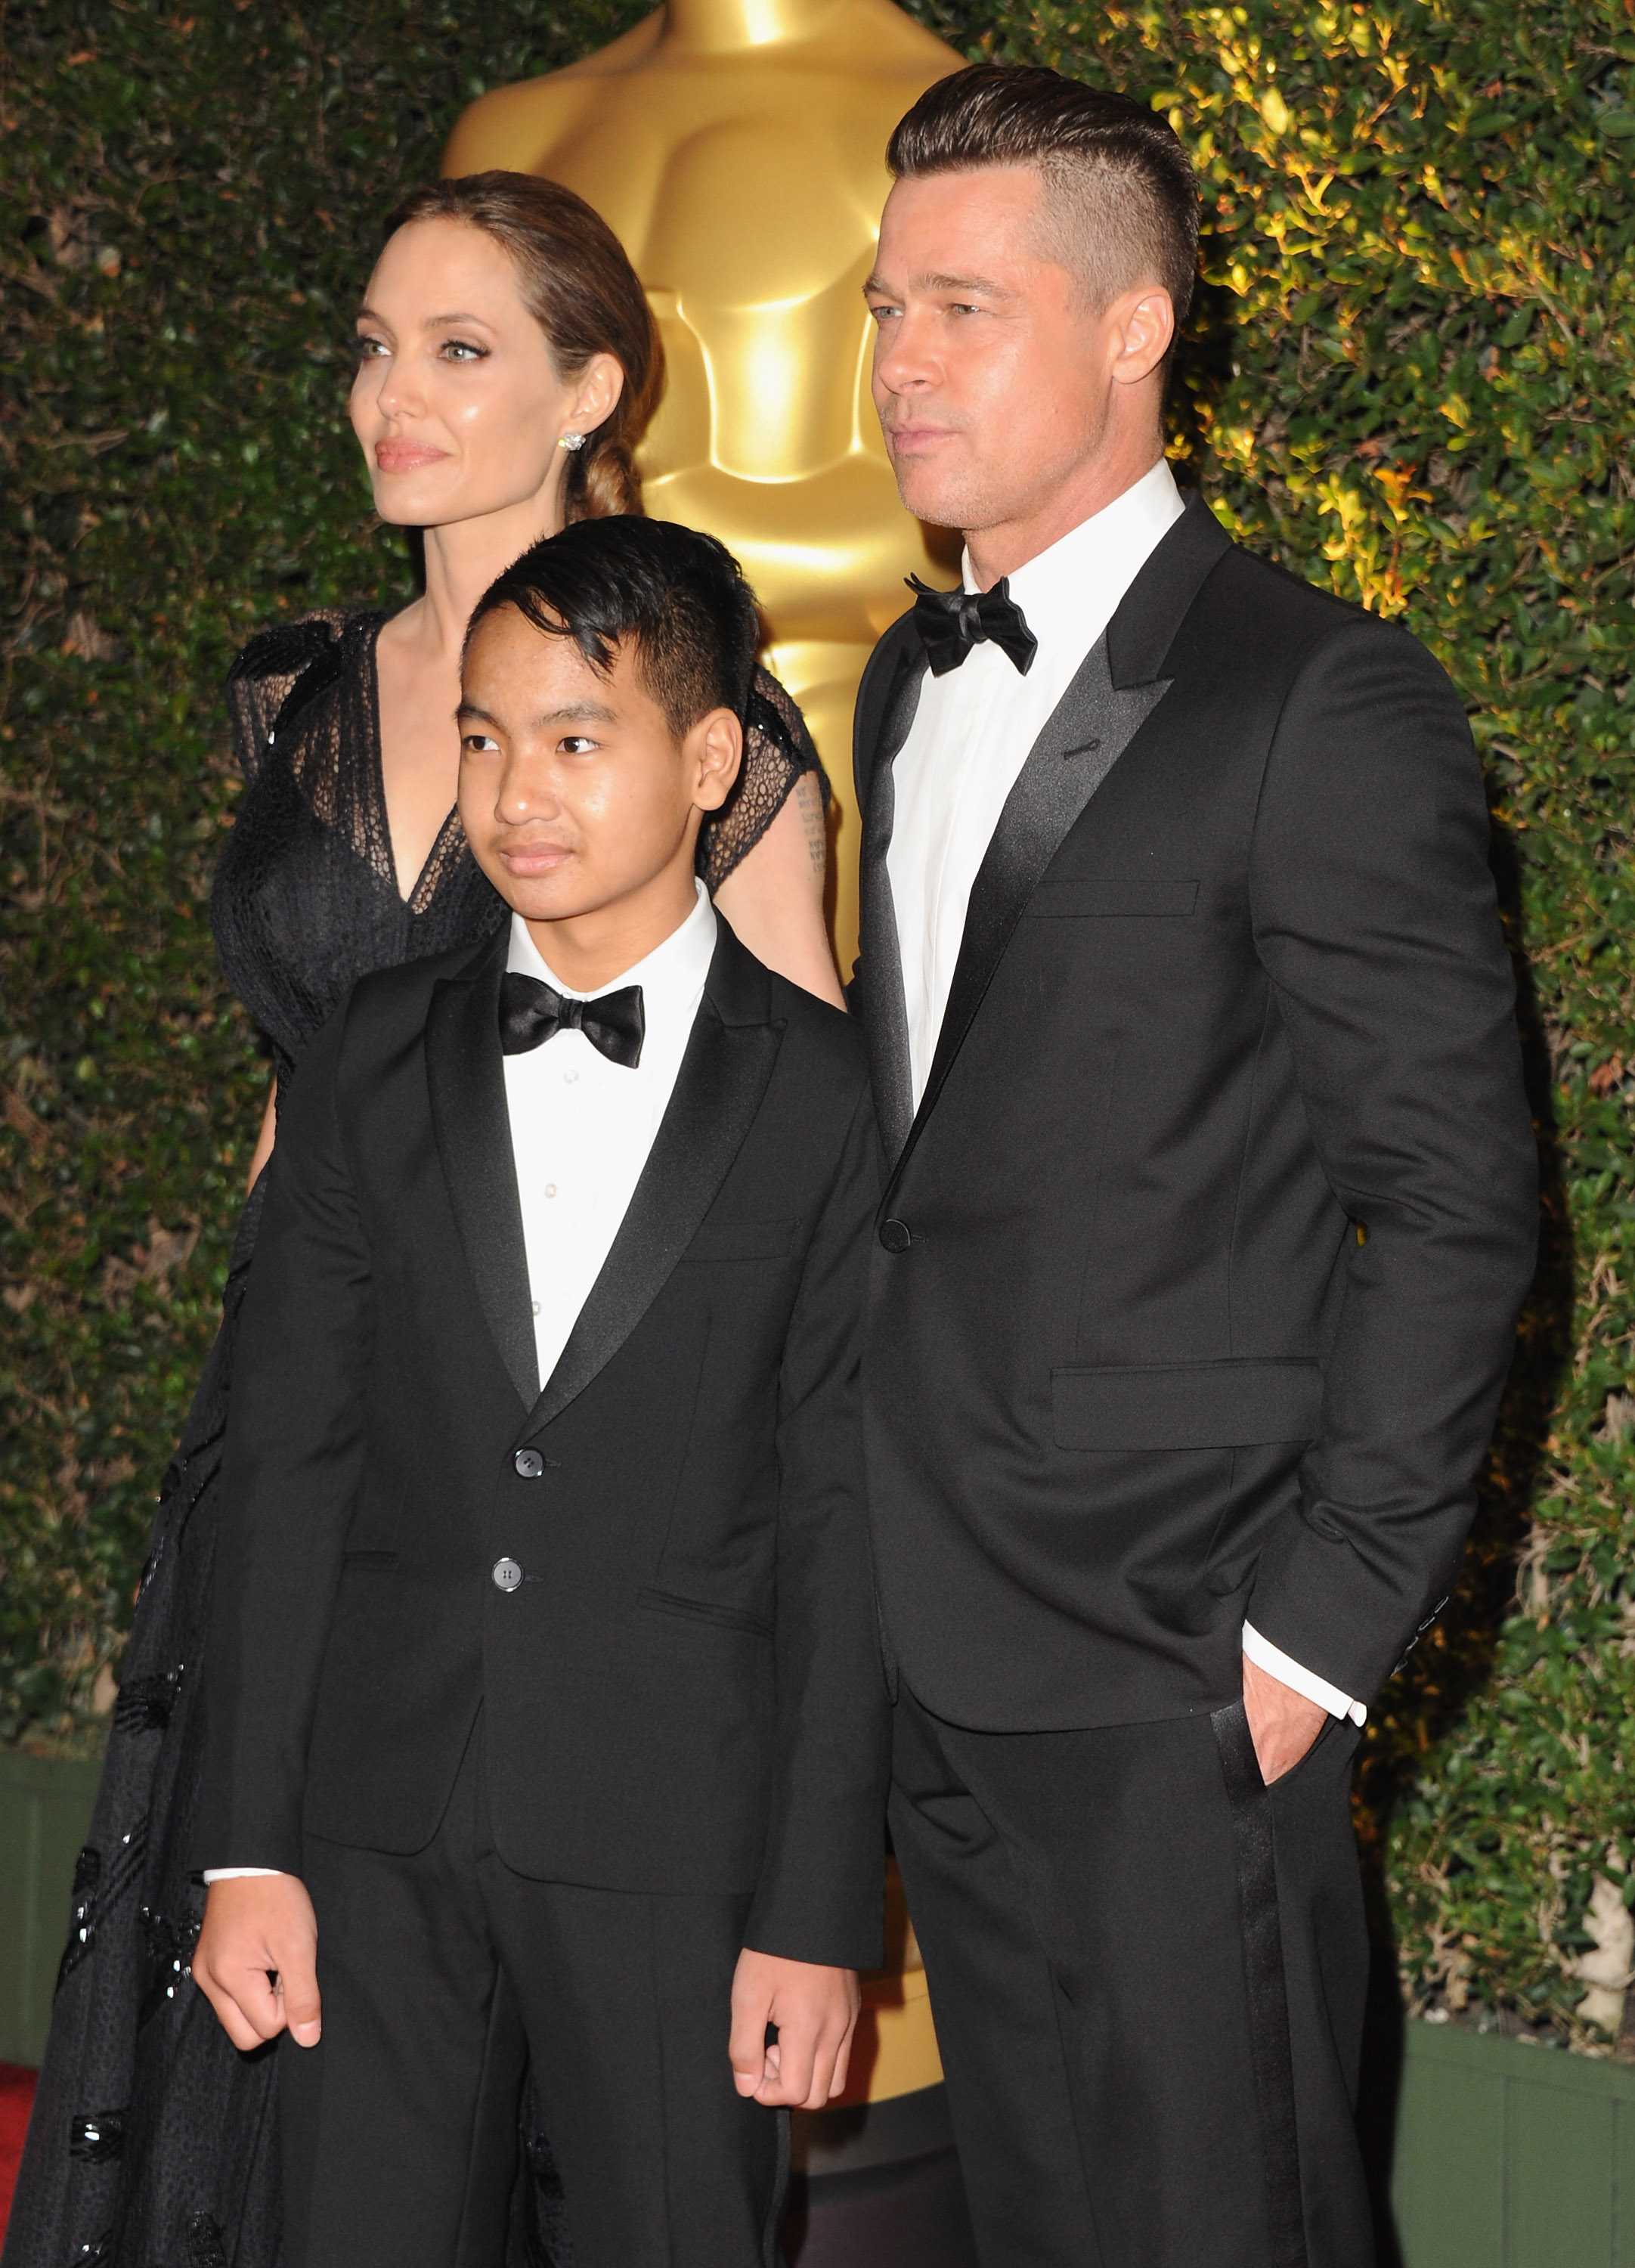 Angelina Jolie, Maddox Chivan Jolie-Pitt y Brad Pitt en los premios The Board Of Governors Of The Academy Of Motion Picture Arts And Sciences' Governor Awards en Hollywood, 2013 | Foto: Getty Images